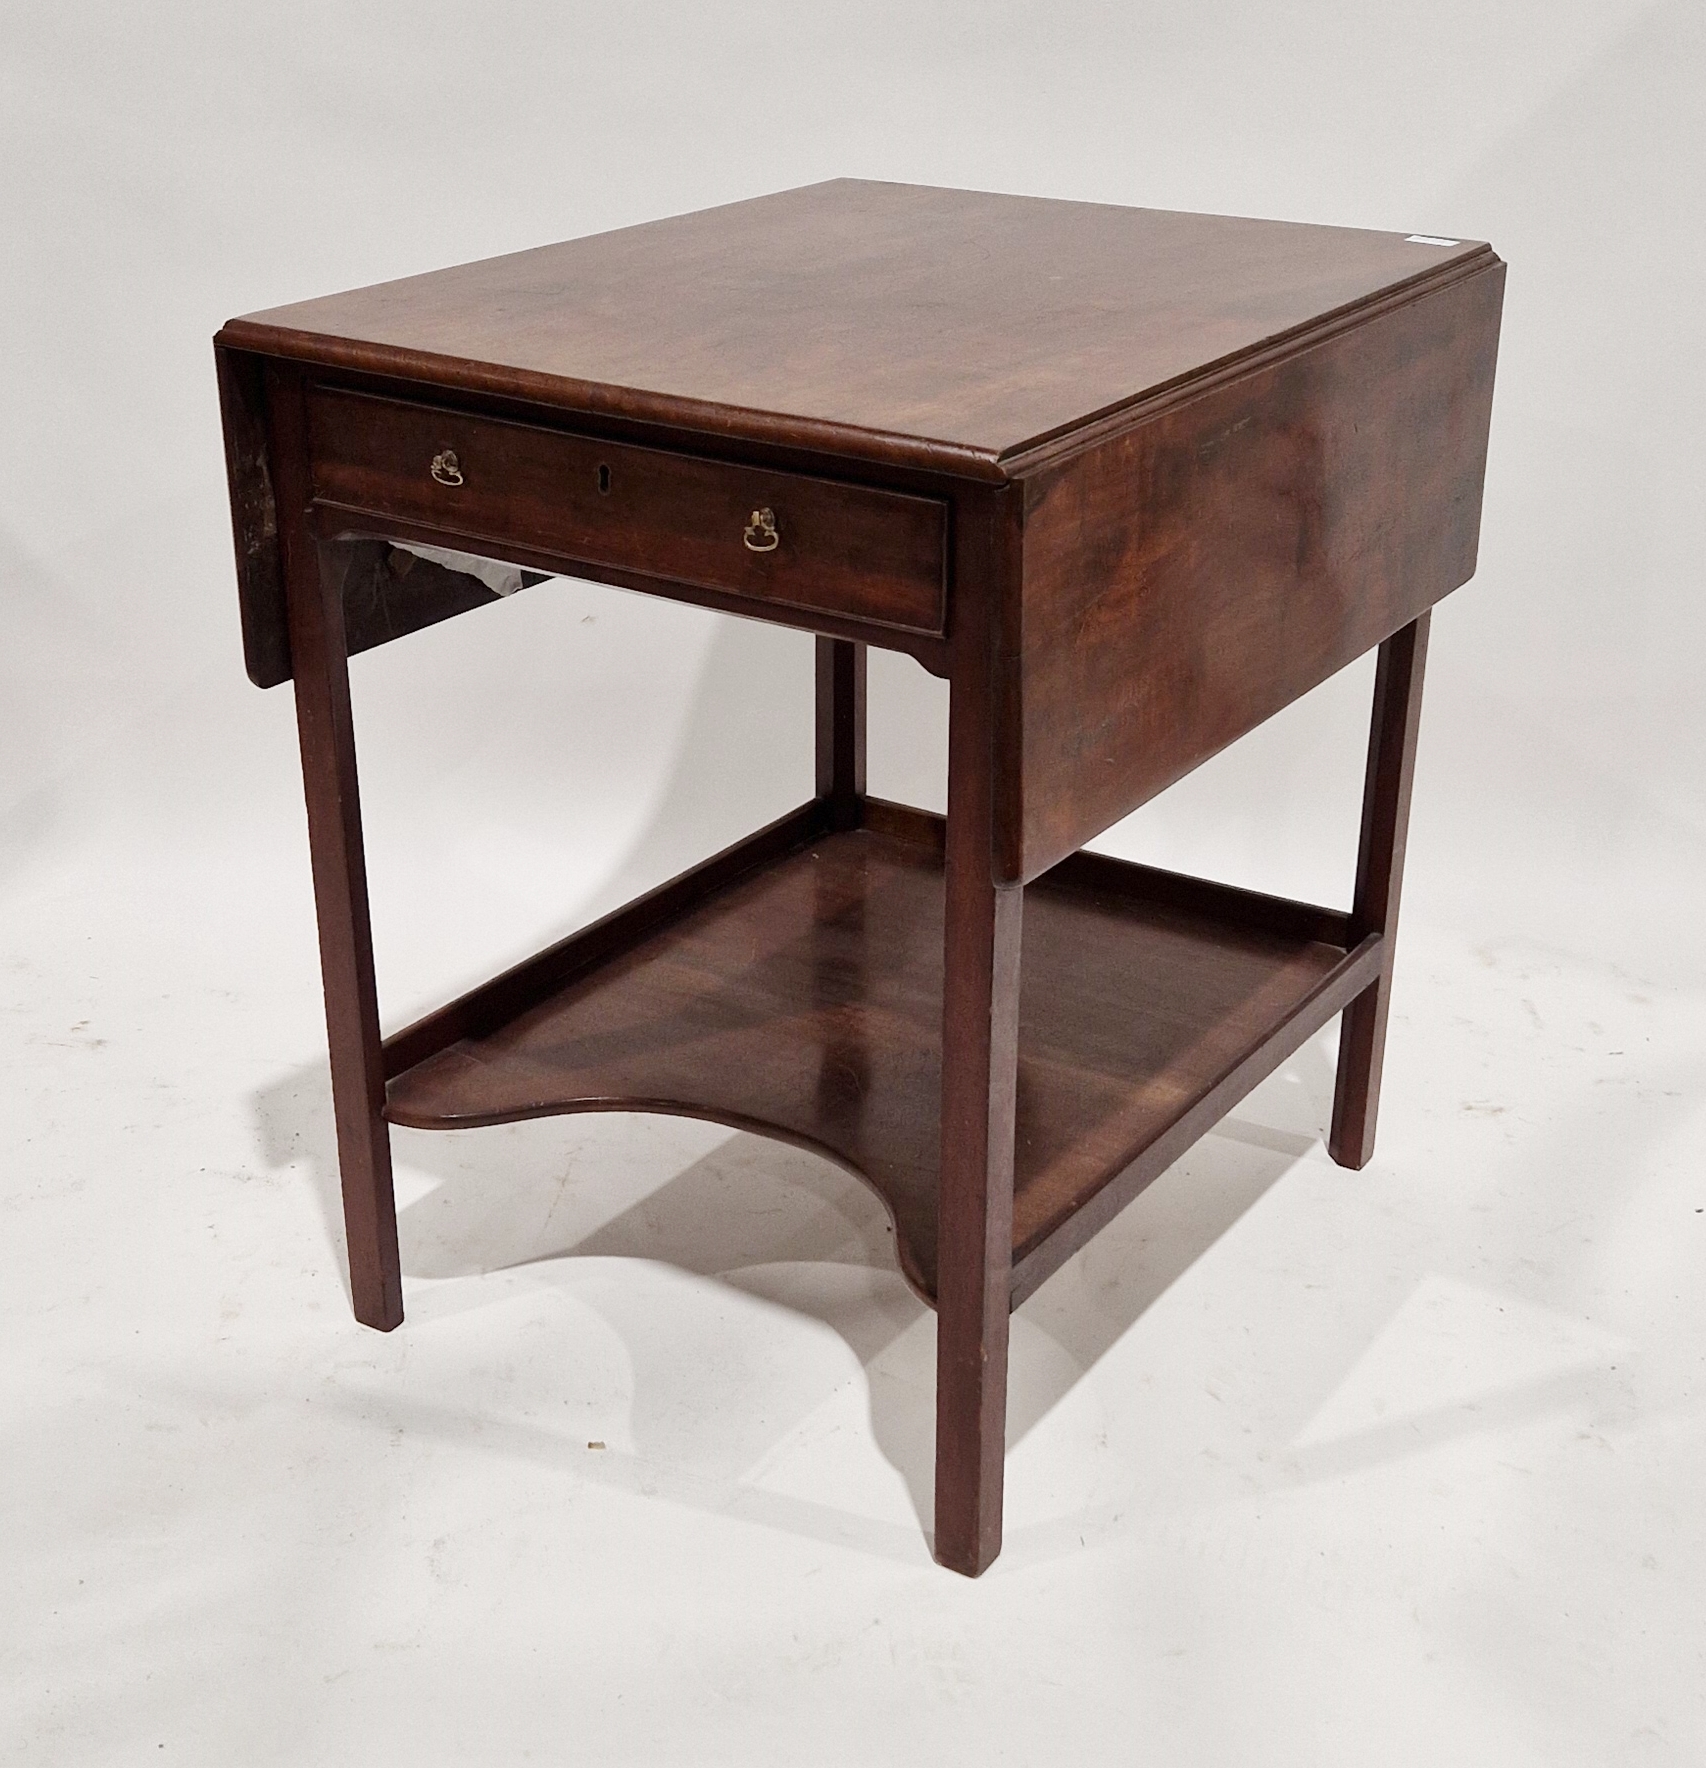 19th century mahogany drop-leaf tea table, the rectangular top on square supports above a lower